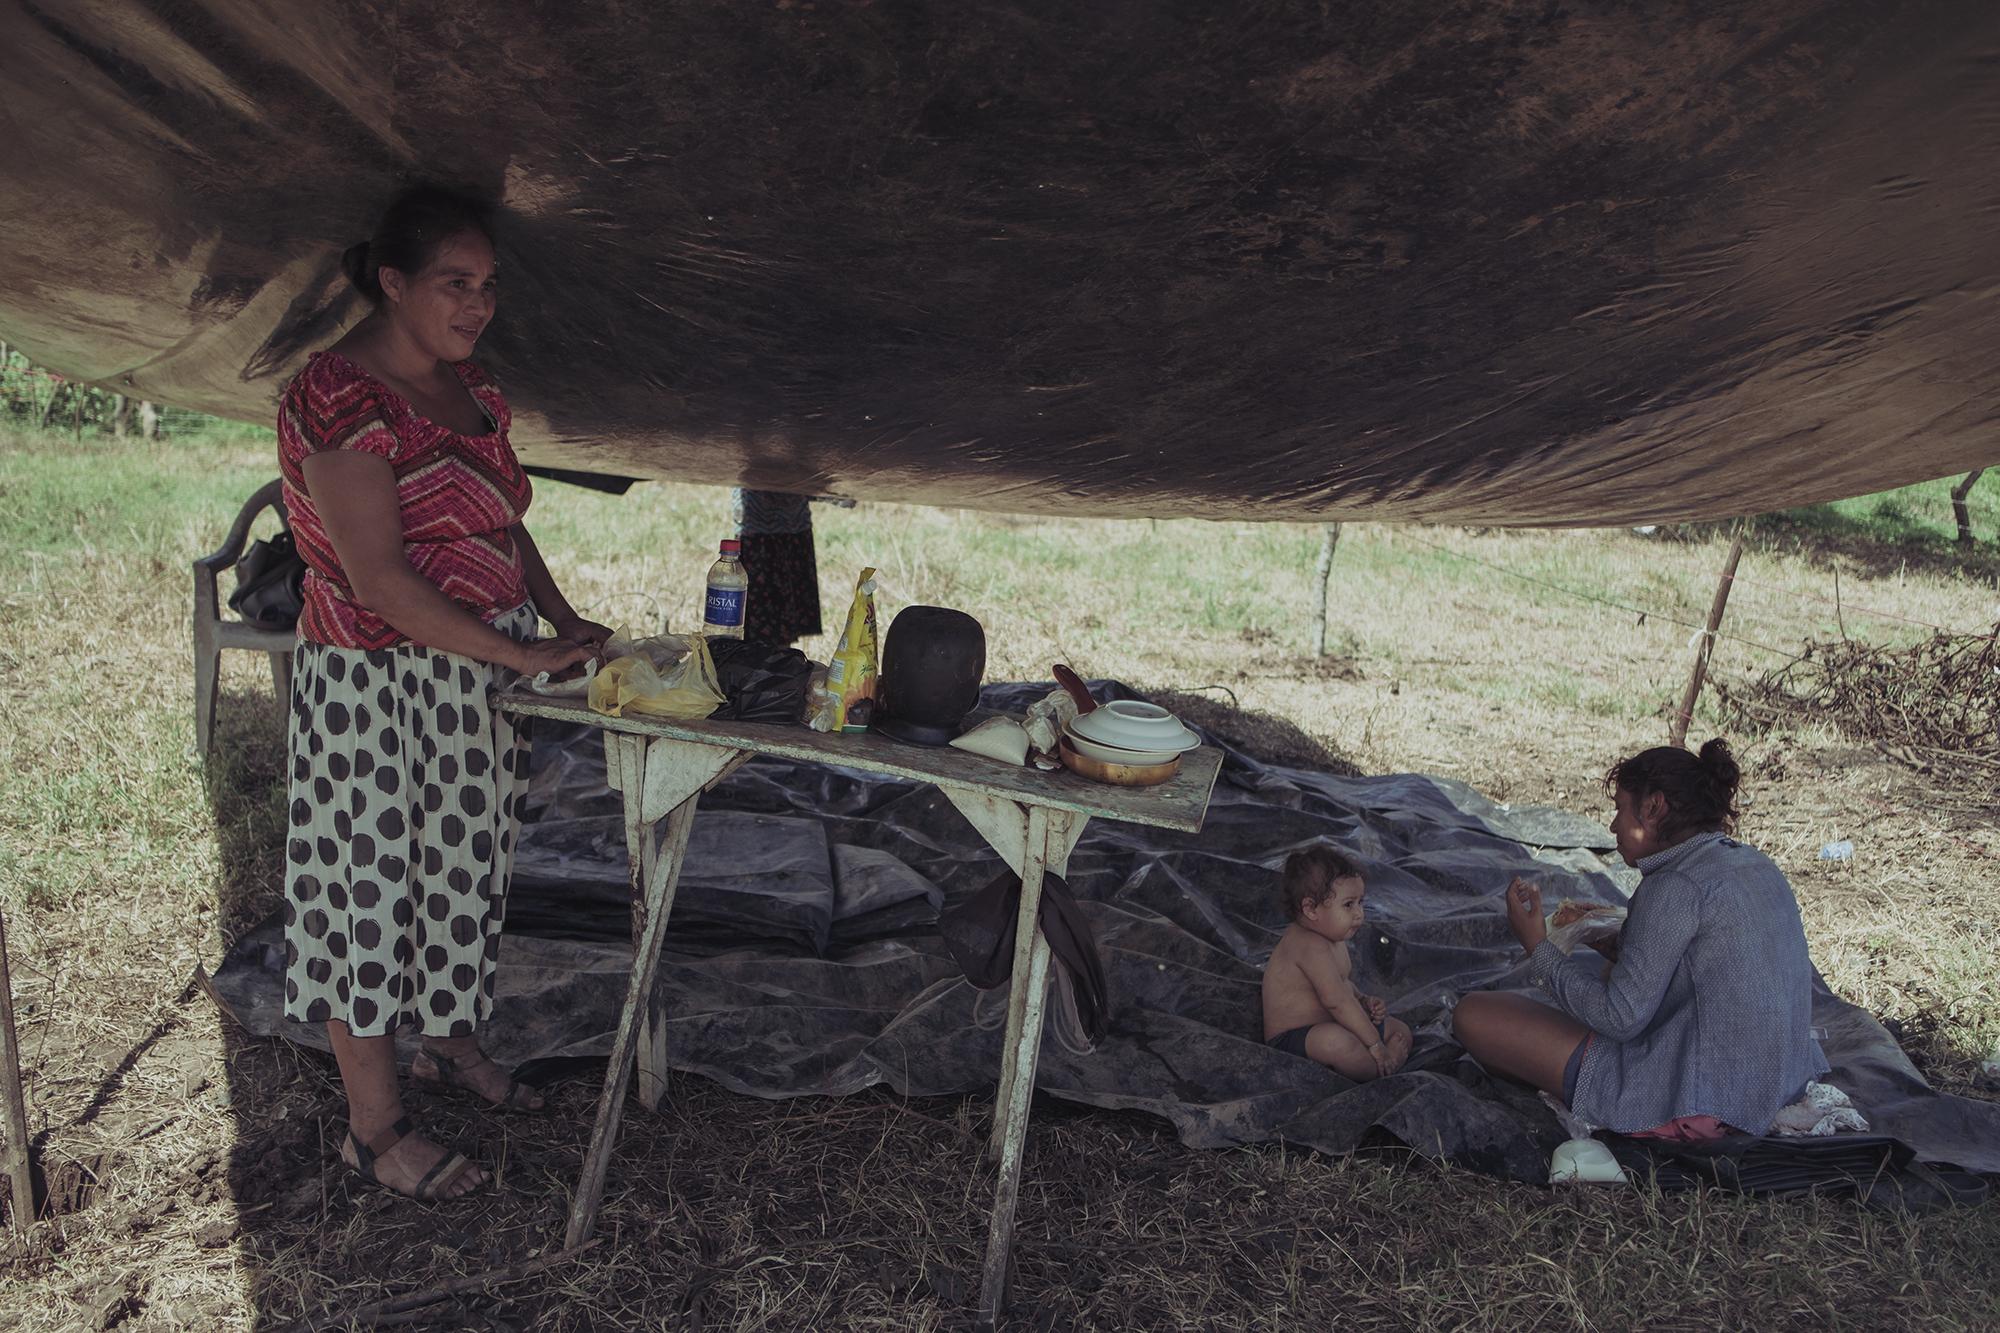 Lunchtime under the tent of Delmy Chicas, 30. Like others, she looked for a campground after failing to pay rent at her old home. She and her partner, who washes buses in San Miguel, have three children. Public transportation was out of service for months amid the quarantine. “He didn’t work for months and we have to pay $60 each month where we live. We don’t have that money,” she said as she ate. 